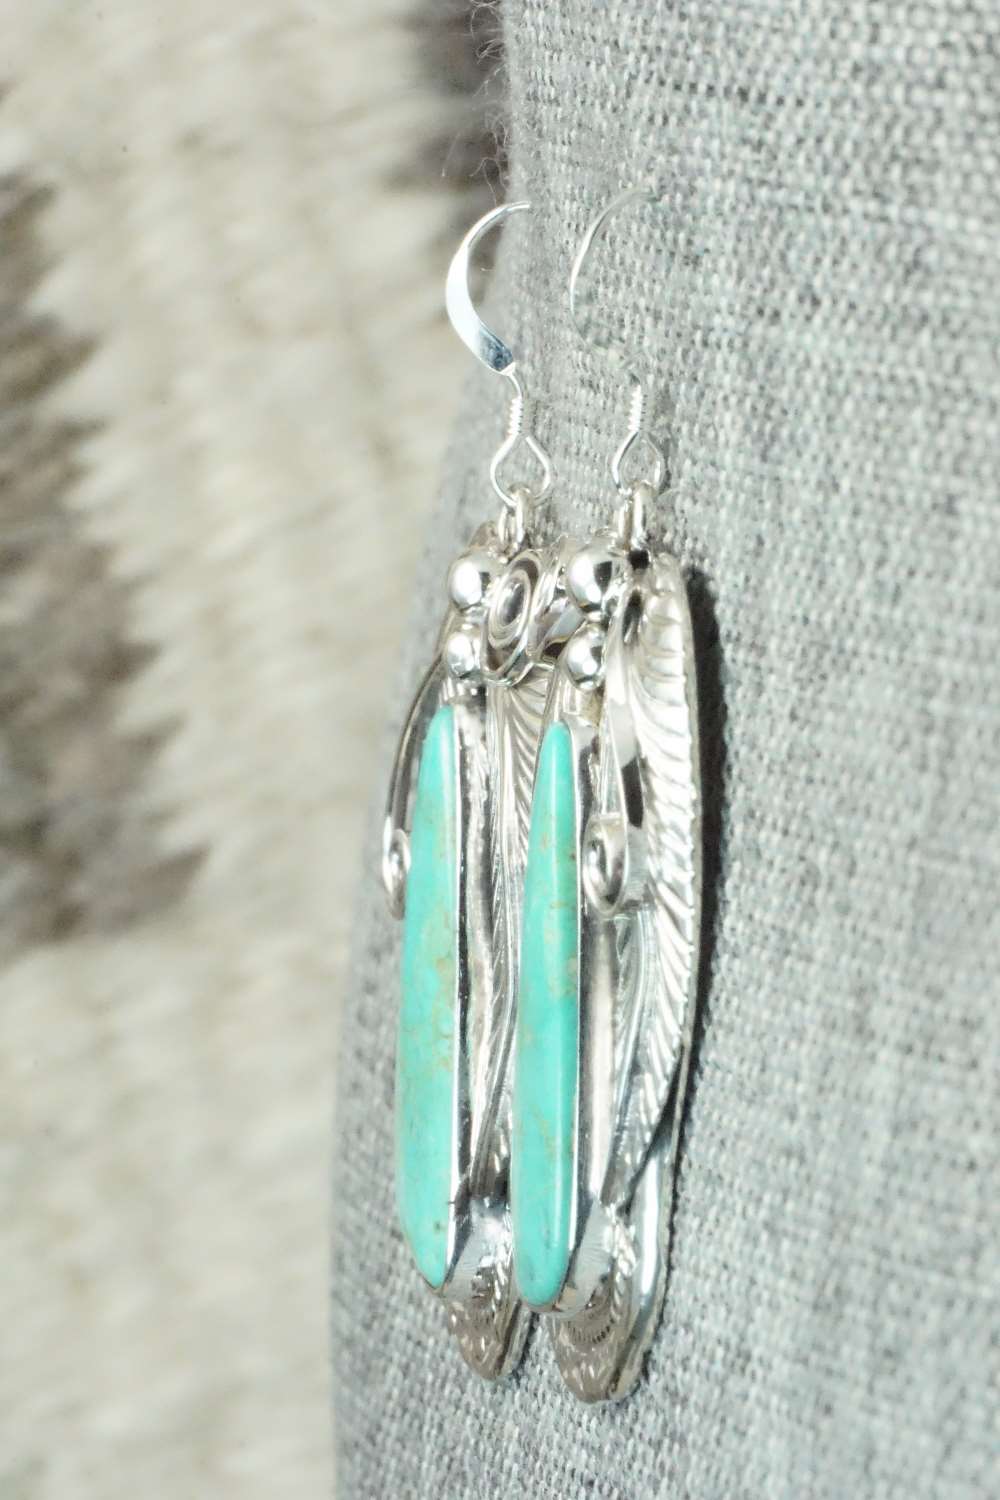 Turquoise & Sterling Silver Earrings - Davey Morgan